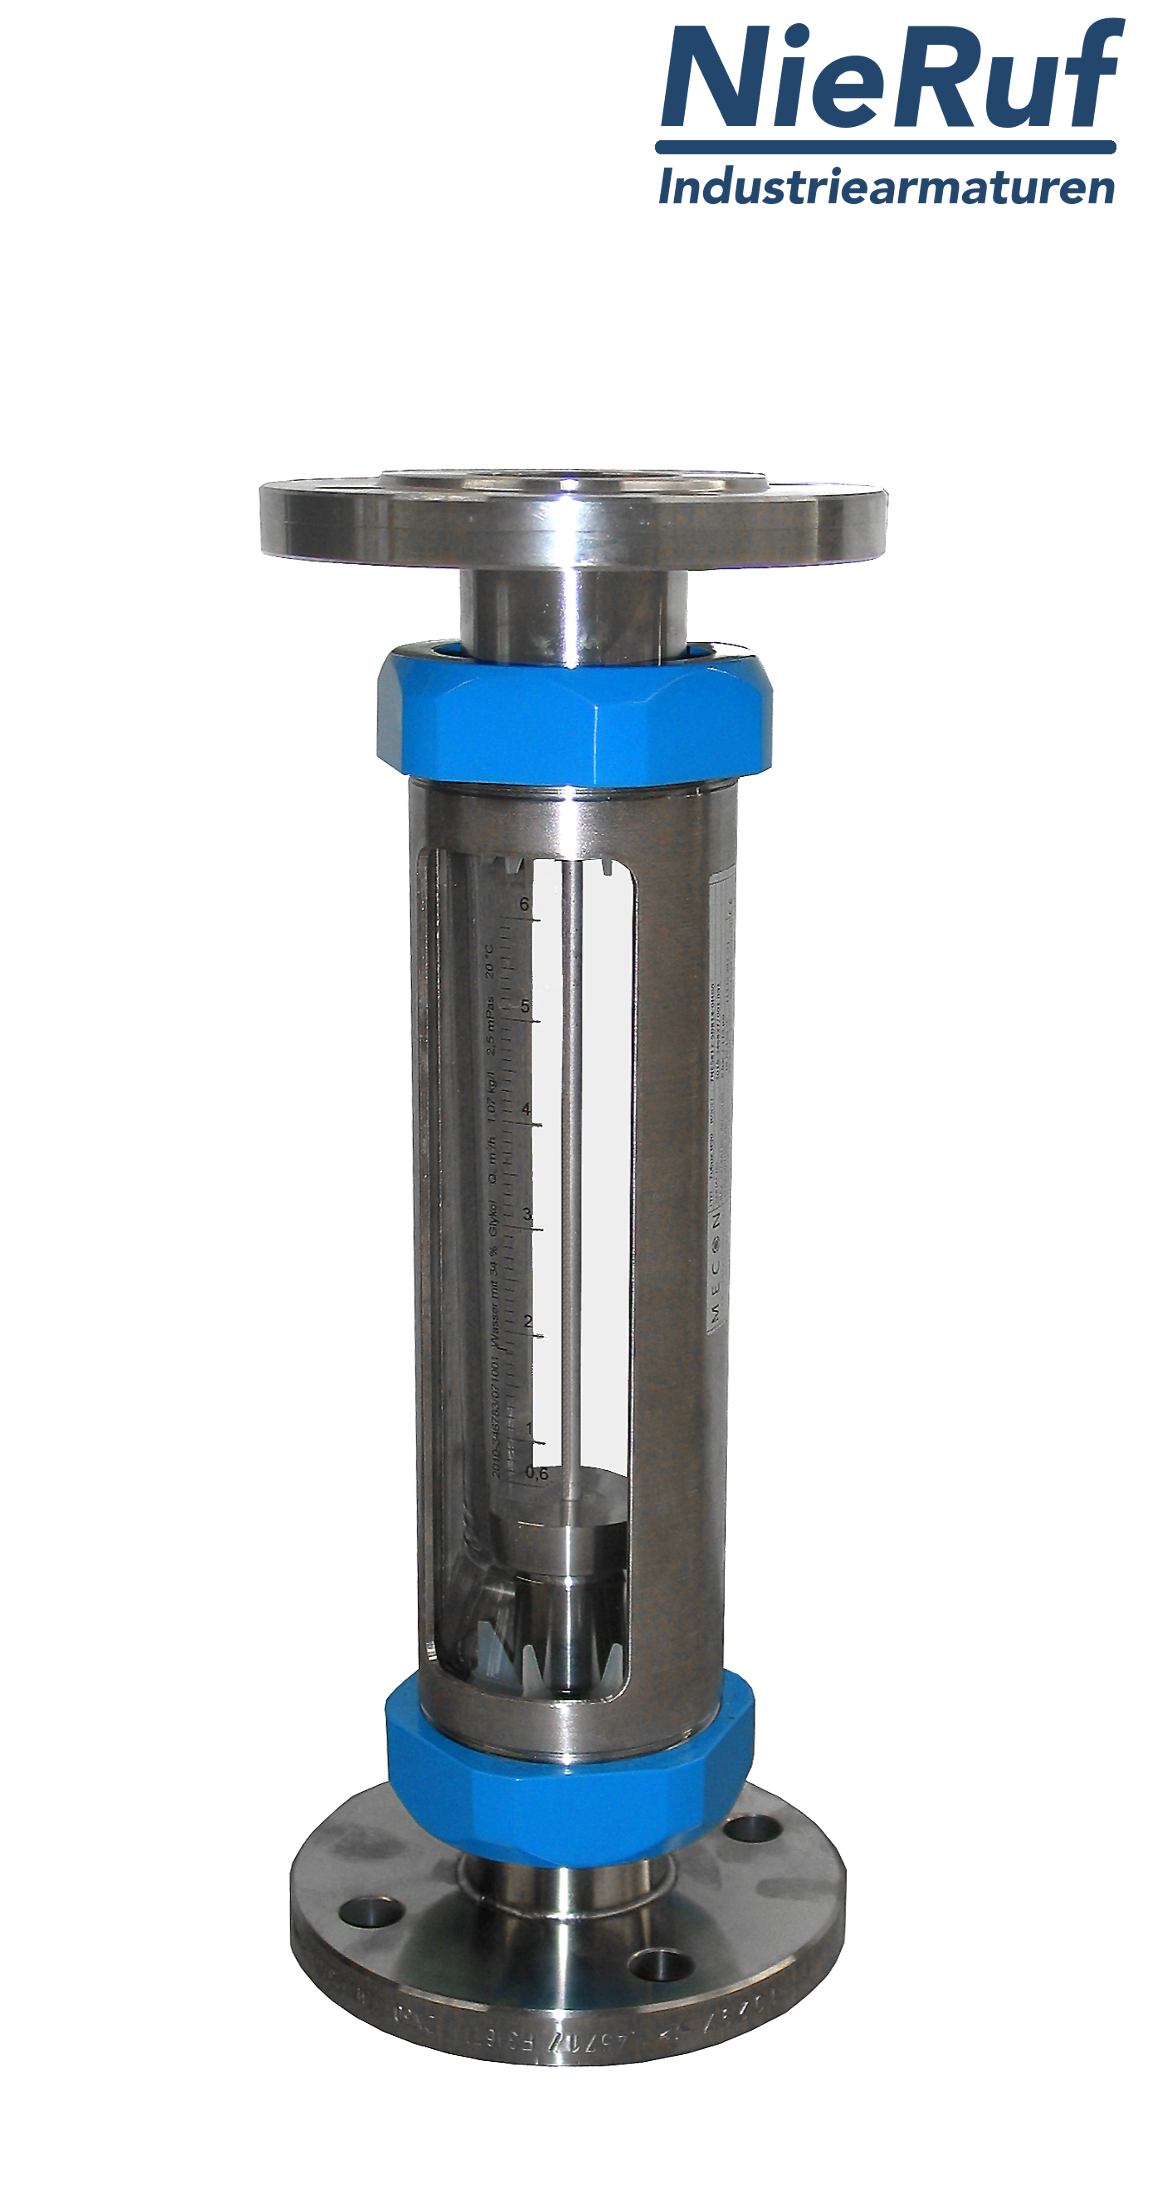 Variable area flowmeter stainless steel + borosilicate flange DN20 3.0 - 30.0 l/h water FKM